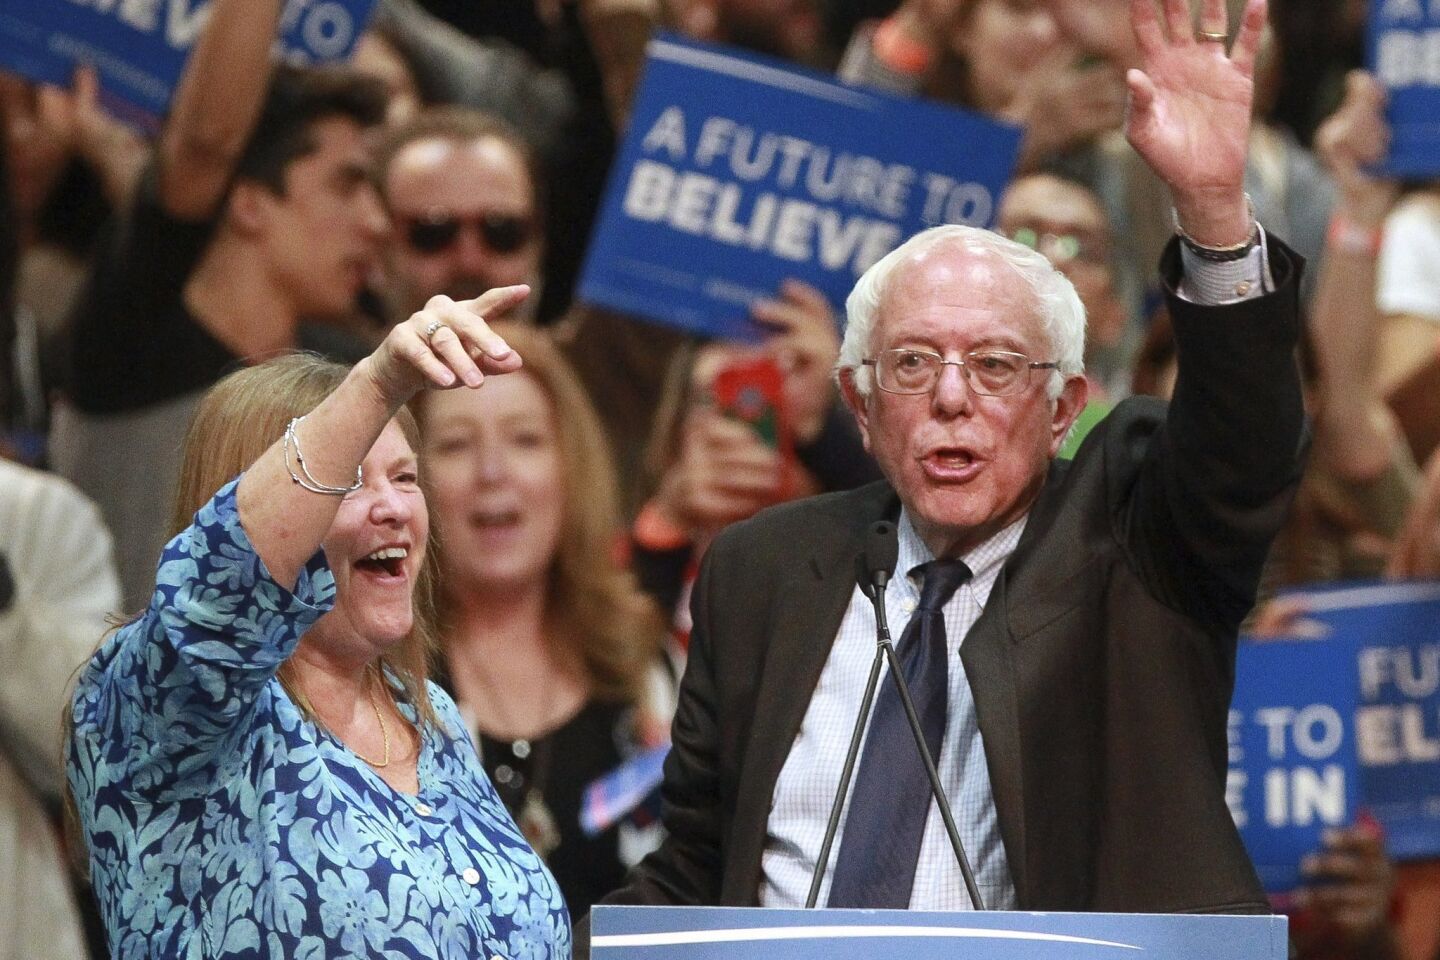 Democratic presidential candidate Bernie Sanders and his wife Jane Sanders wave at the conclusion of Sander's speech.